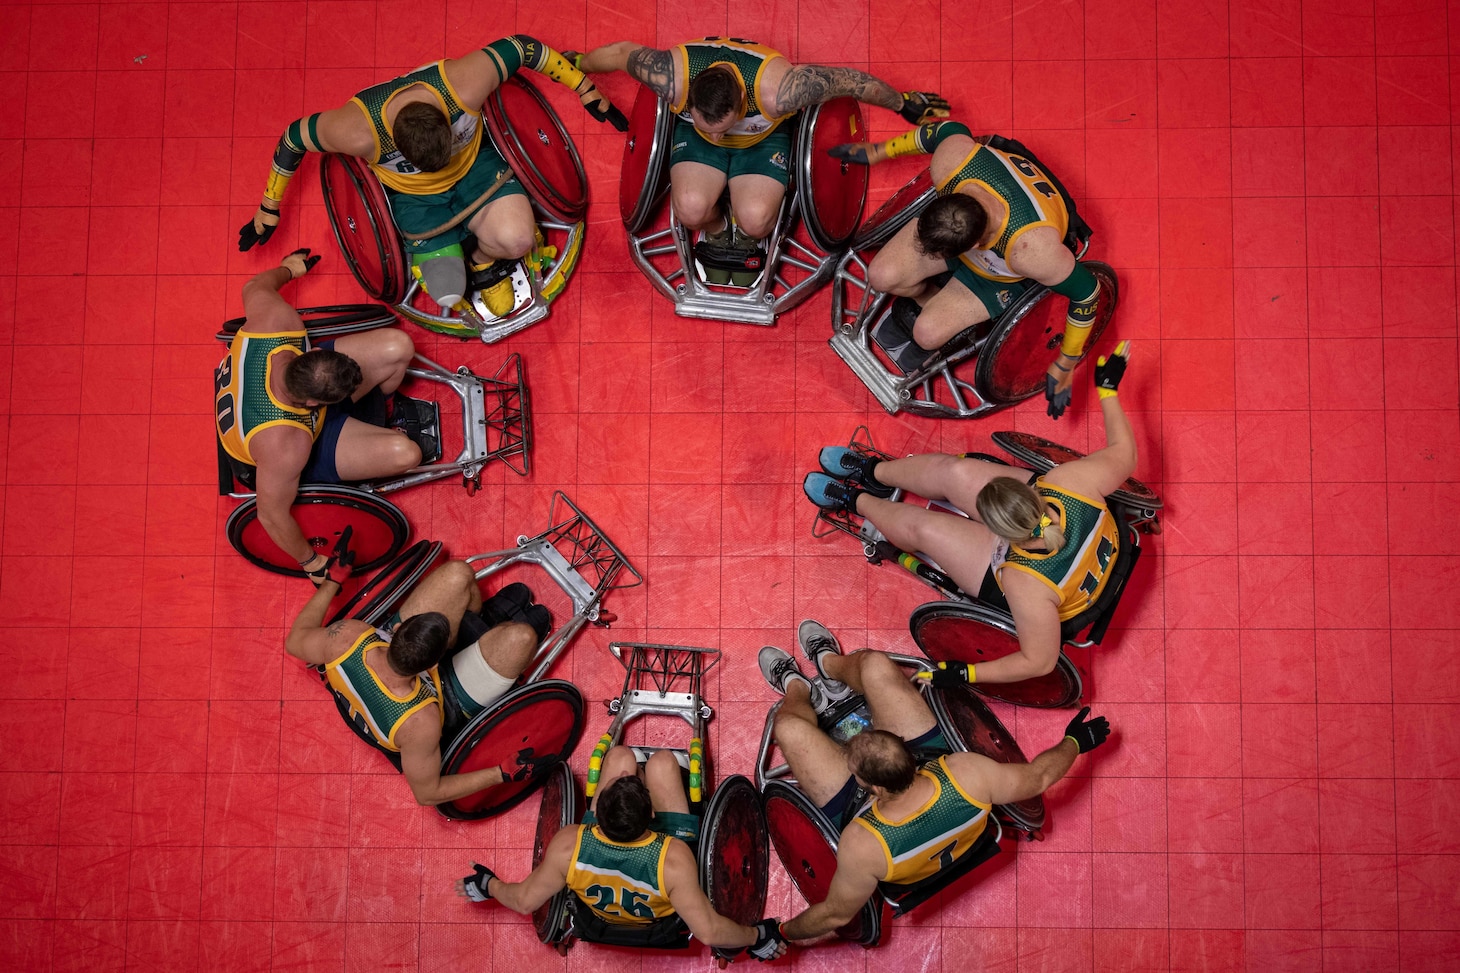 Overhead photo of Team Australia Wounded Warriors huddle in a circle at half time during the 2019 DoD Warrior Games wheelchair rugby preliminaries in Tampa, Florida.